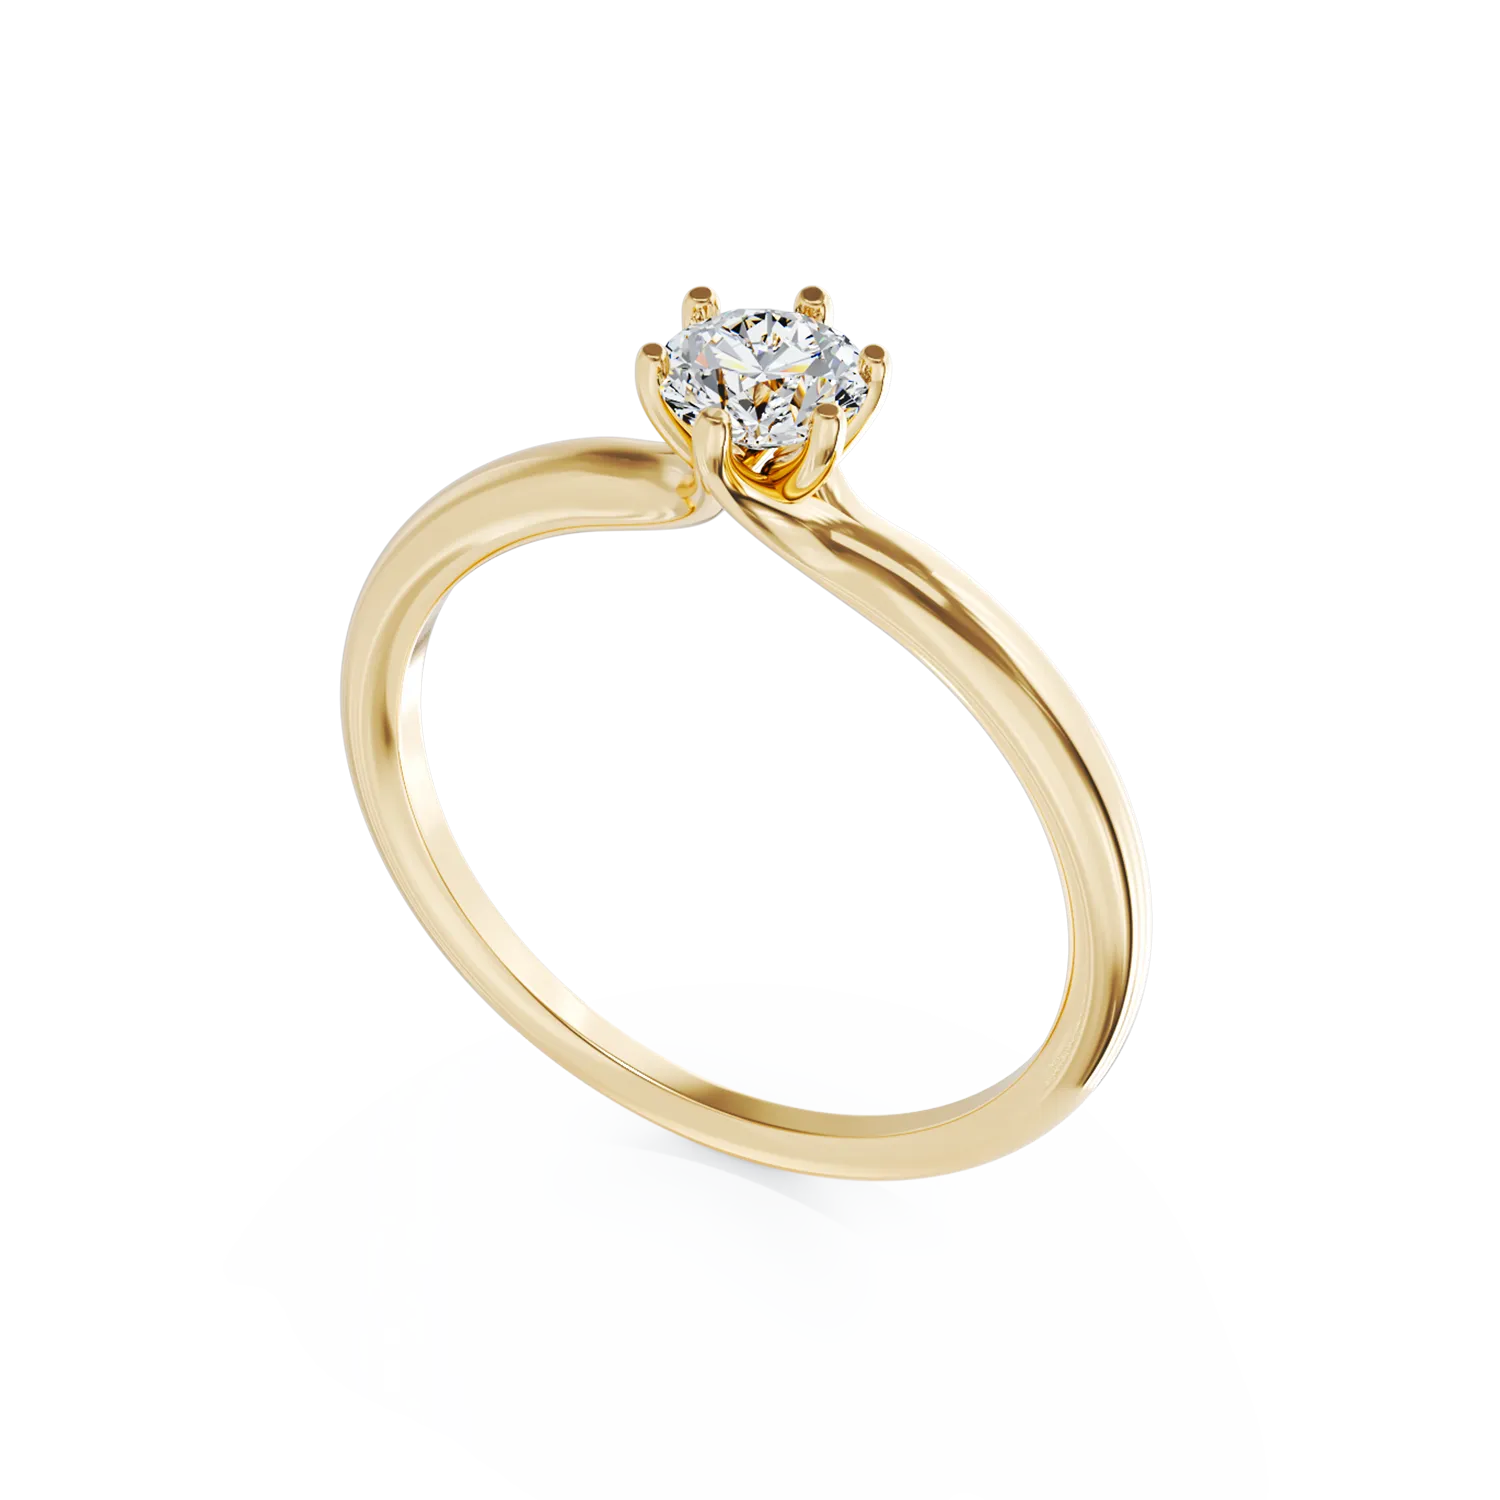 18K yellow gold engagement ring with a 0.3ct solitaire diamond